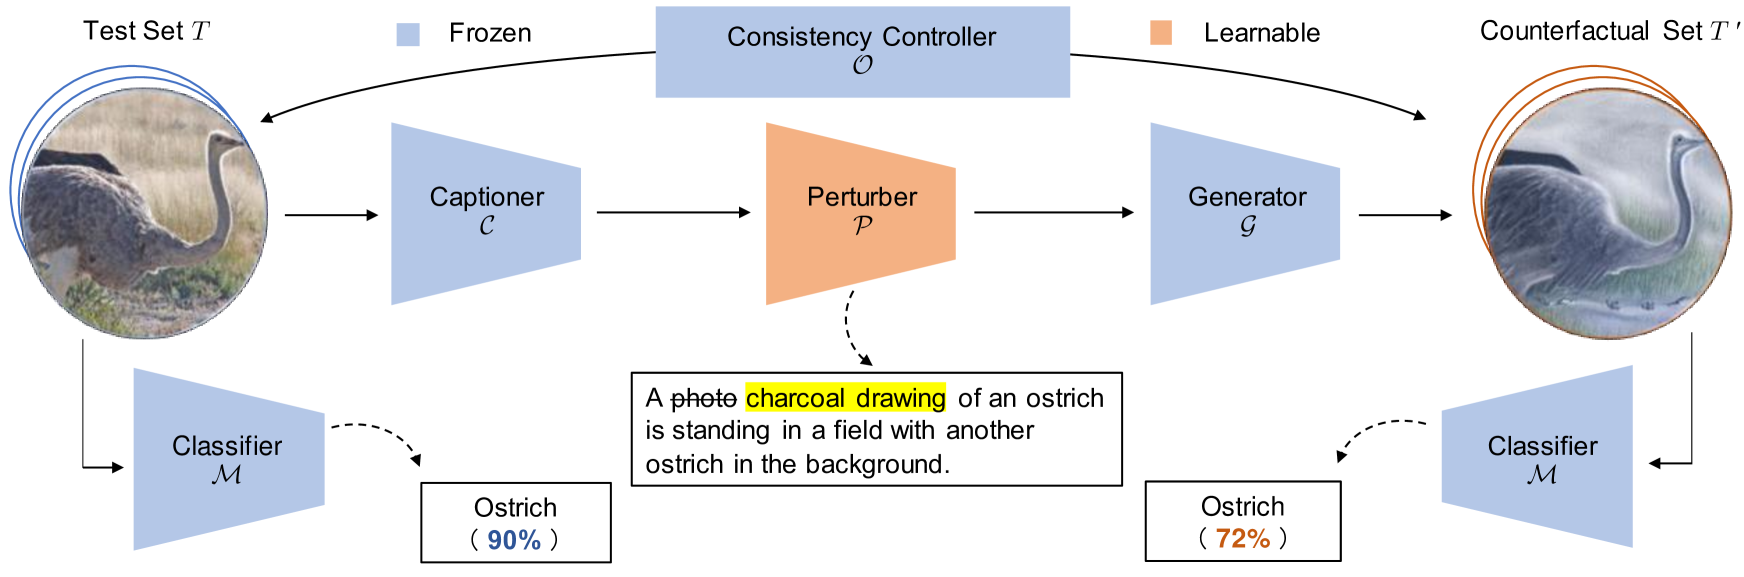 Reinforcing Pre-trained Models Using Counterfactual Images